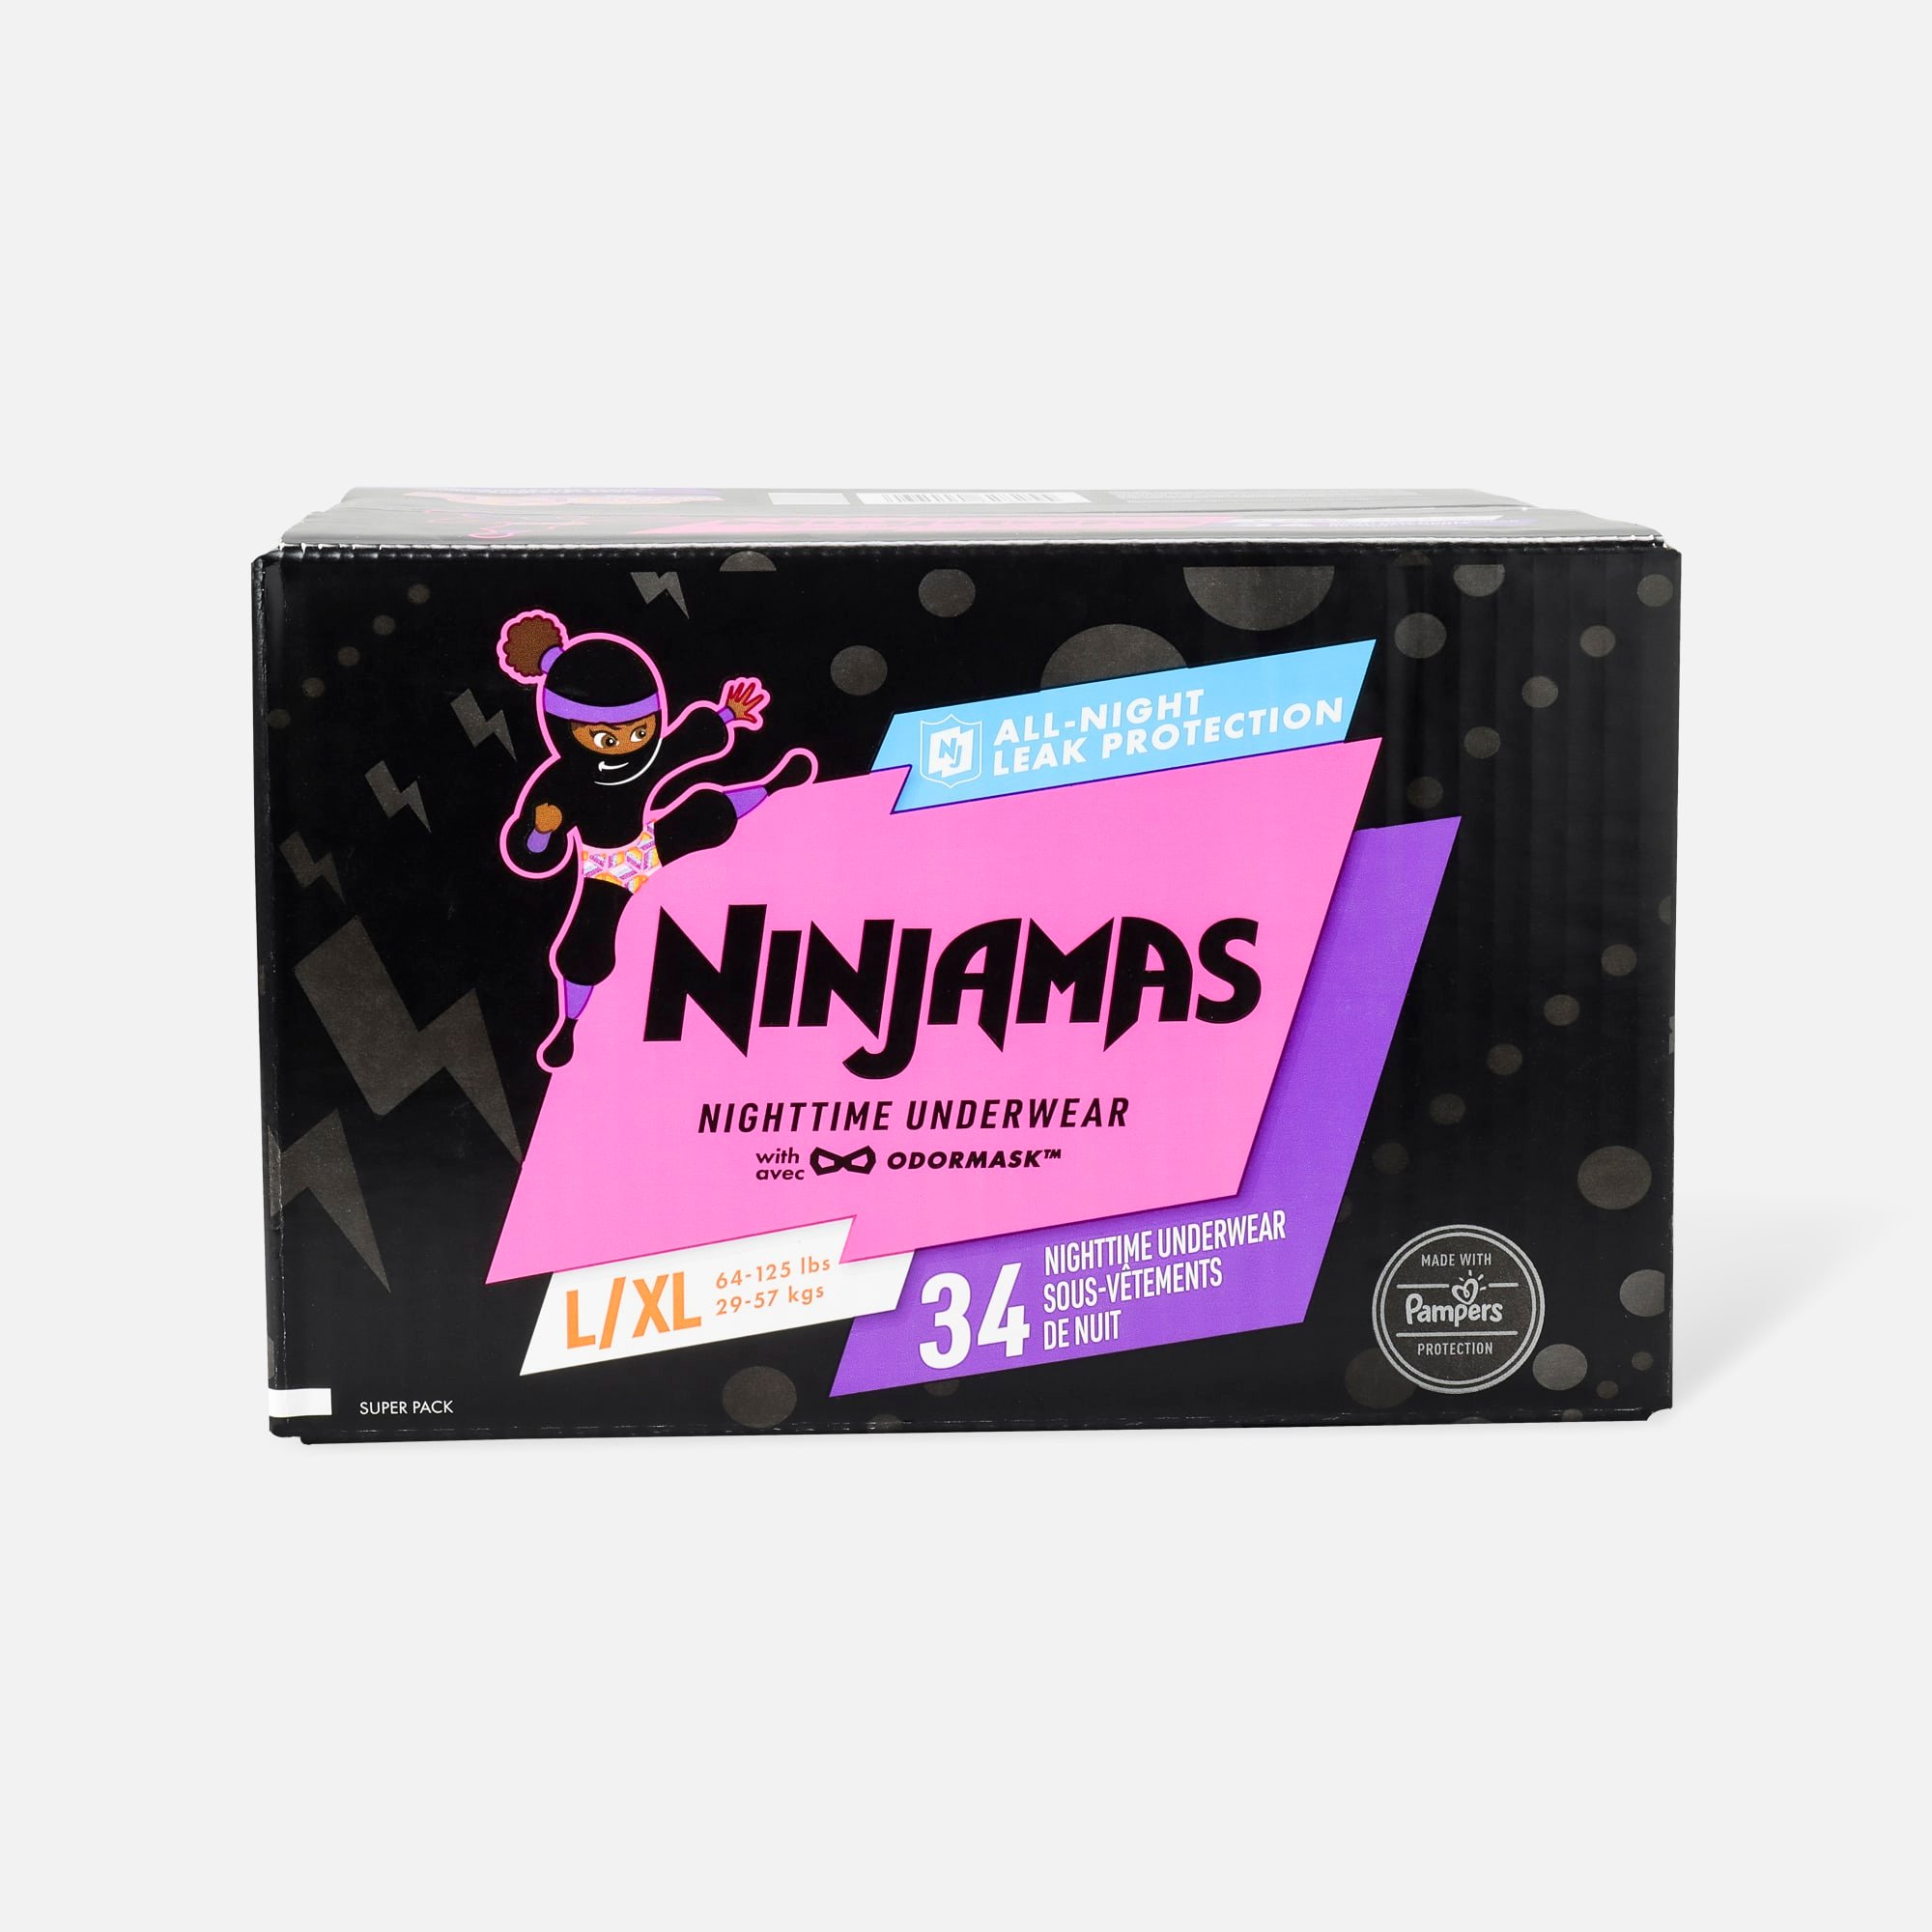 Ninjamas Bedwetting Disposable Underwear, Size L/XL (29-57 Kgs), Night-Time  Pants For Boys, 11 Count price in UAE,  UAE